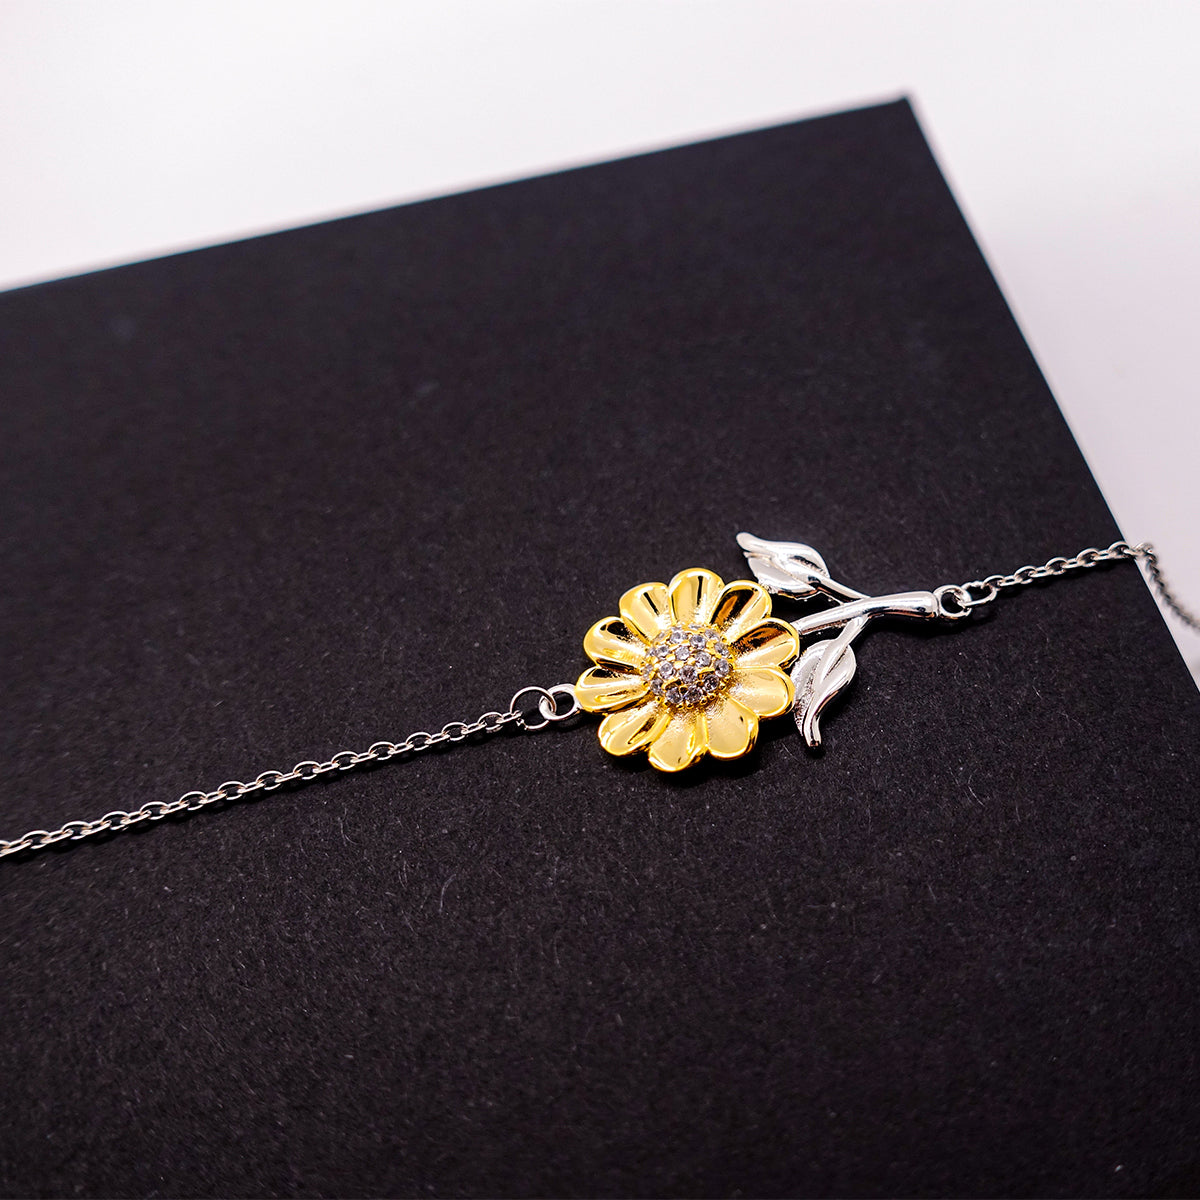 Granddaughter Sunflower Bracelet, Never forget that I love you forever, Inspirational Granddaughter Birthday Unique Gifts From Granny